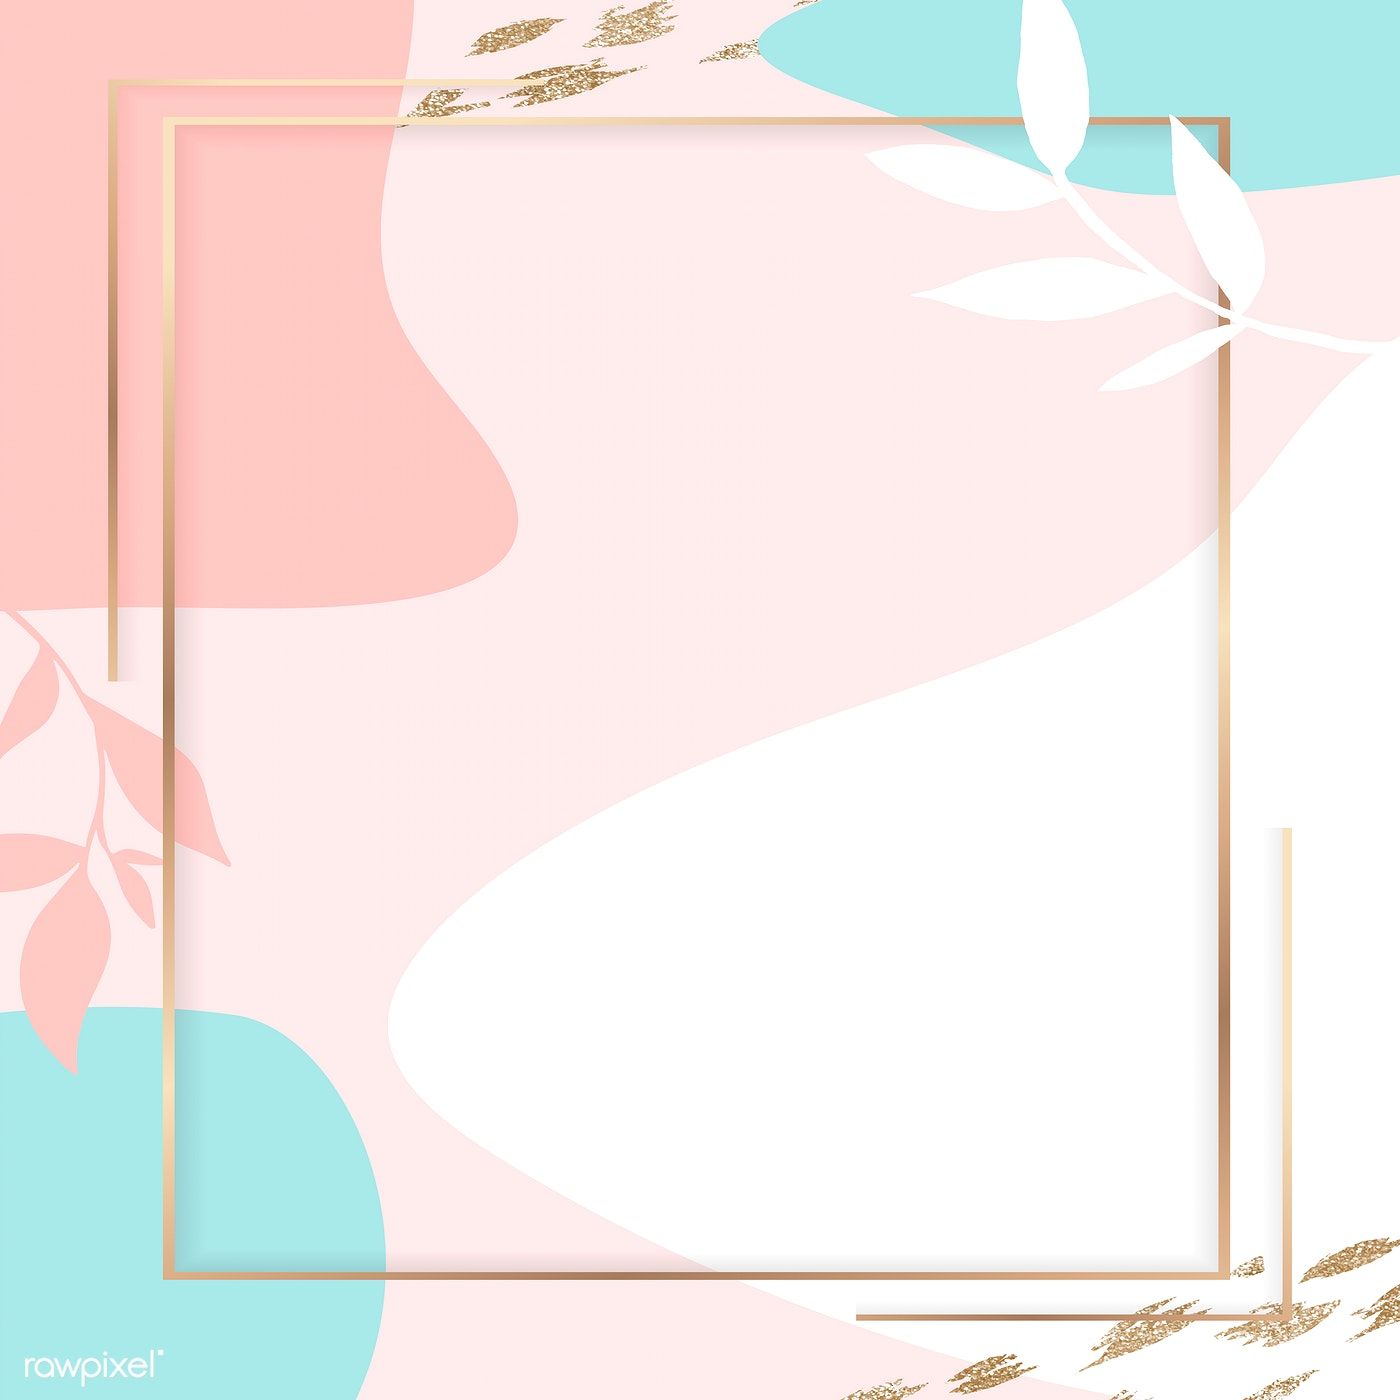 Premium Vector Of Square Golden Frame On A Colorful